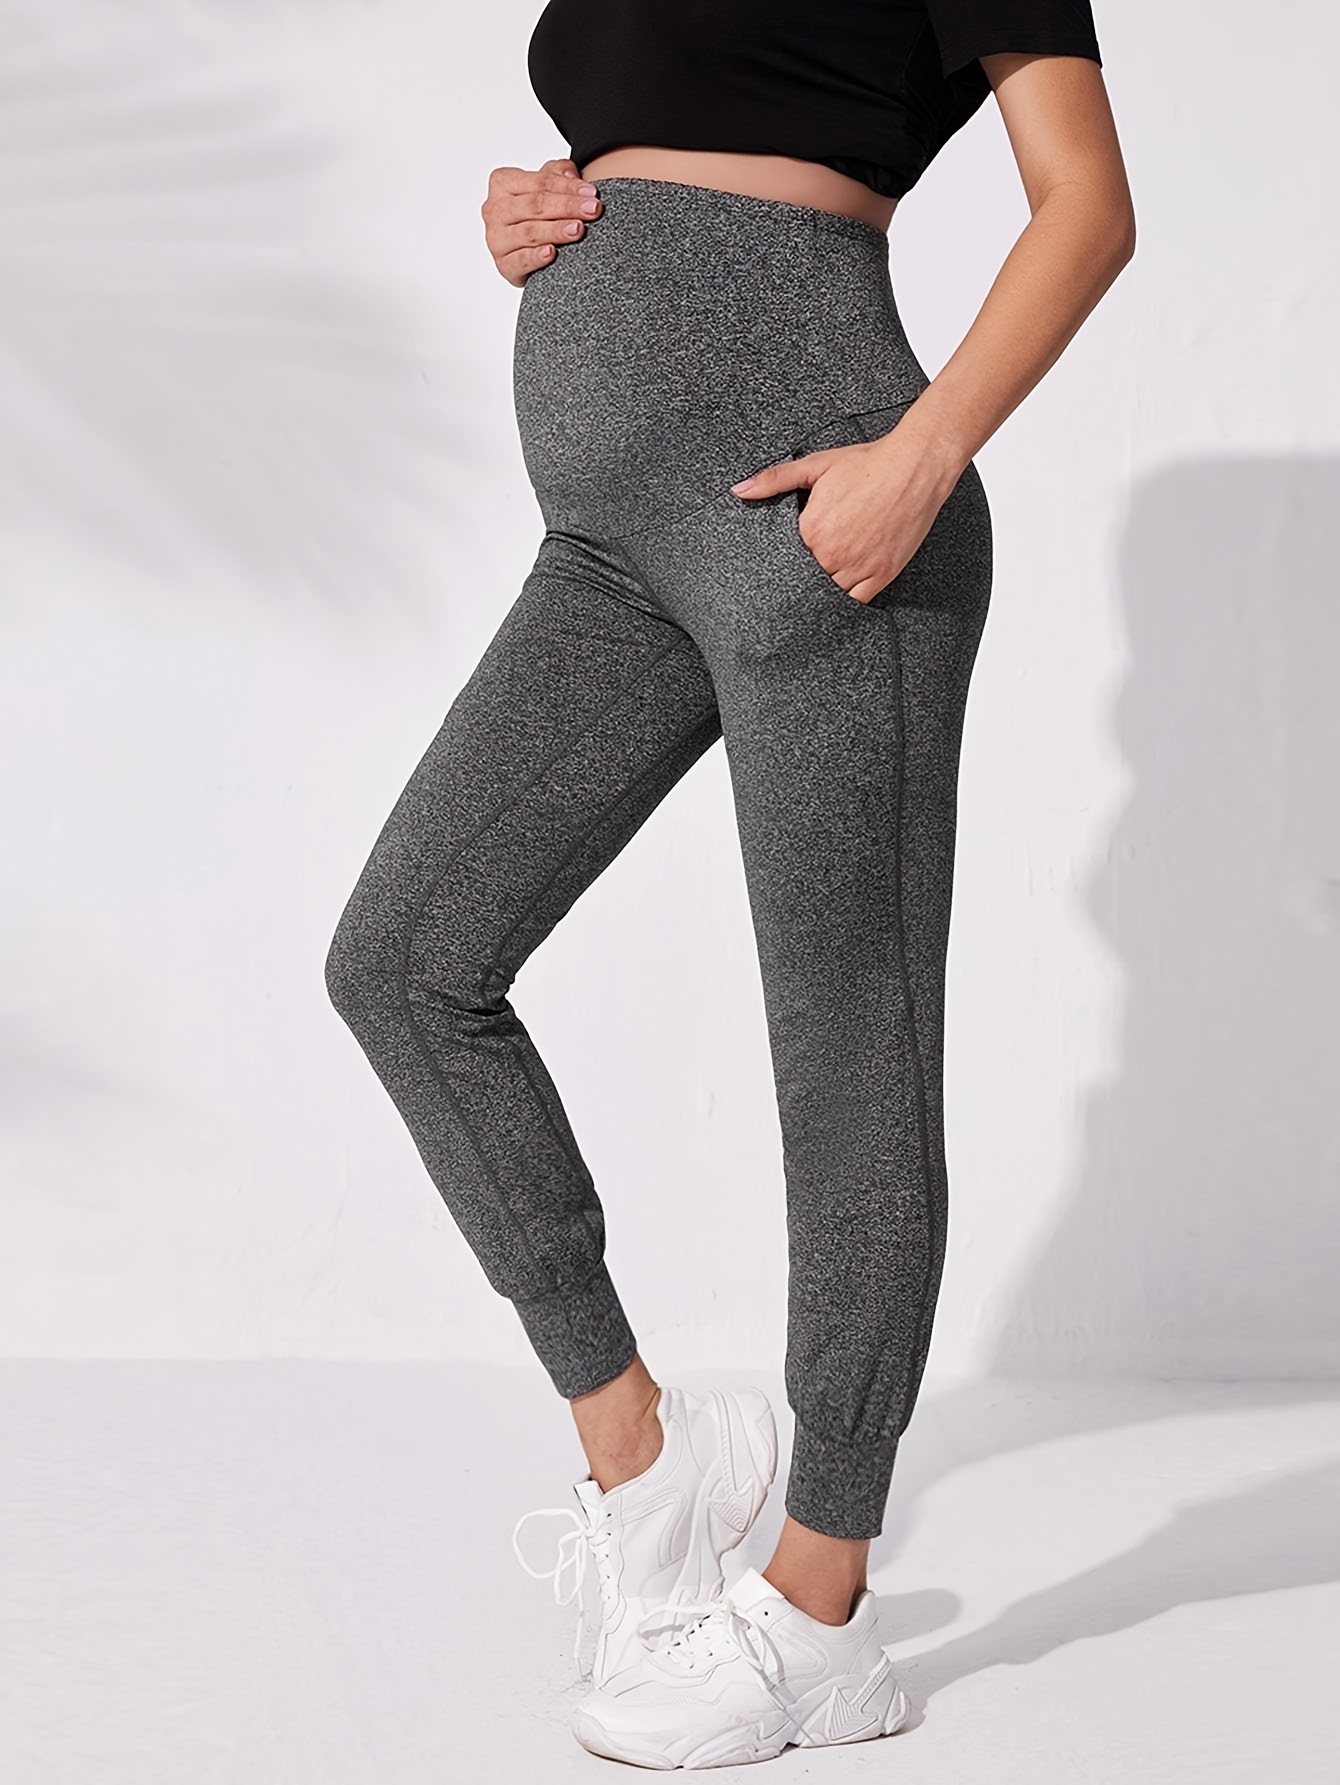 Foucome Women's Maternity Athletic Joggers Pants Quick Dry Zipper